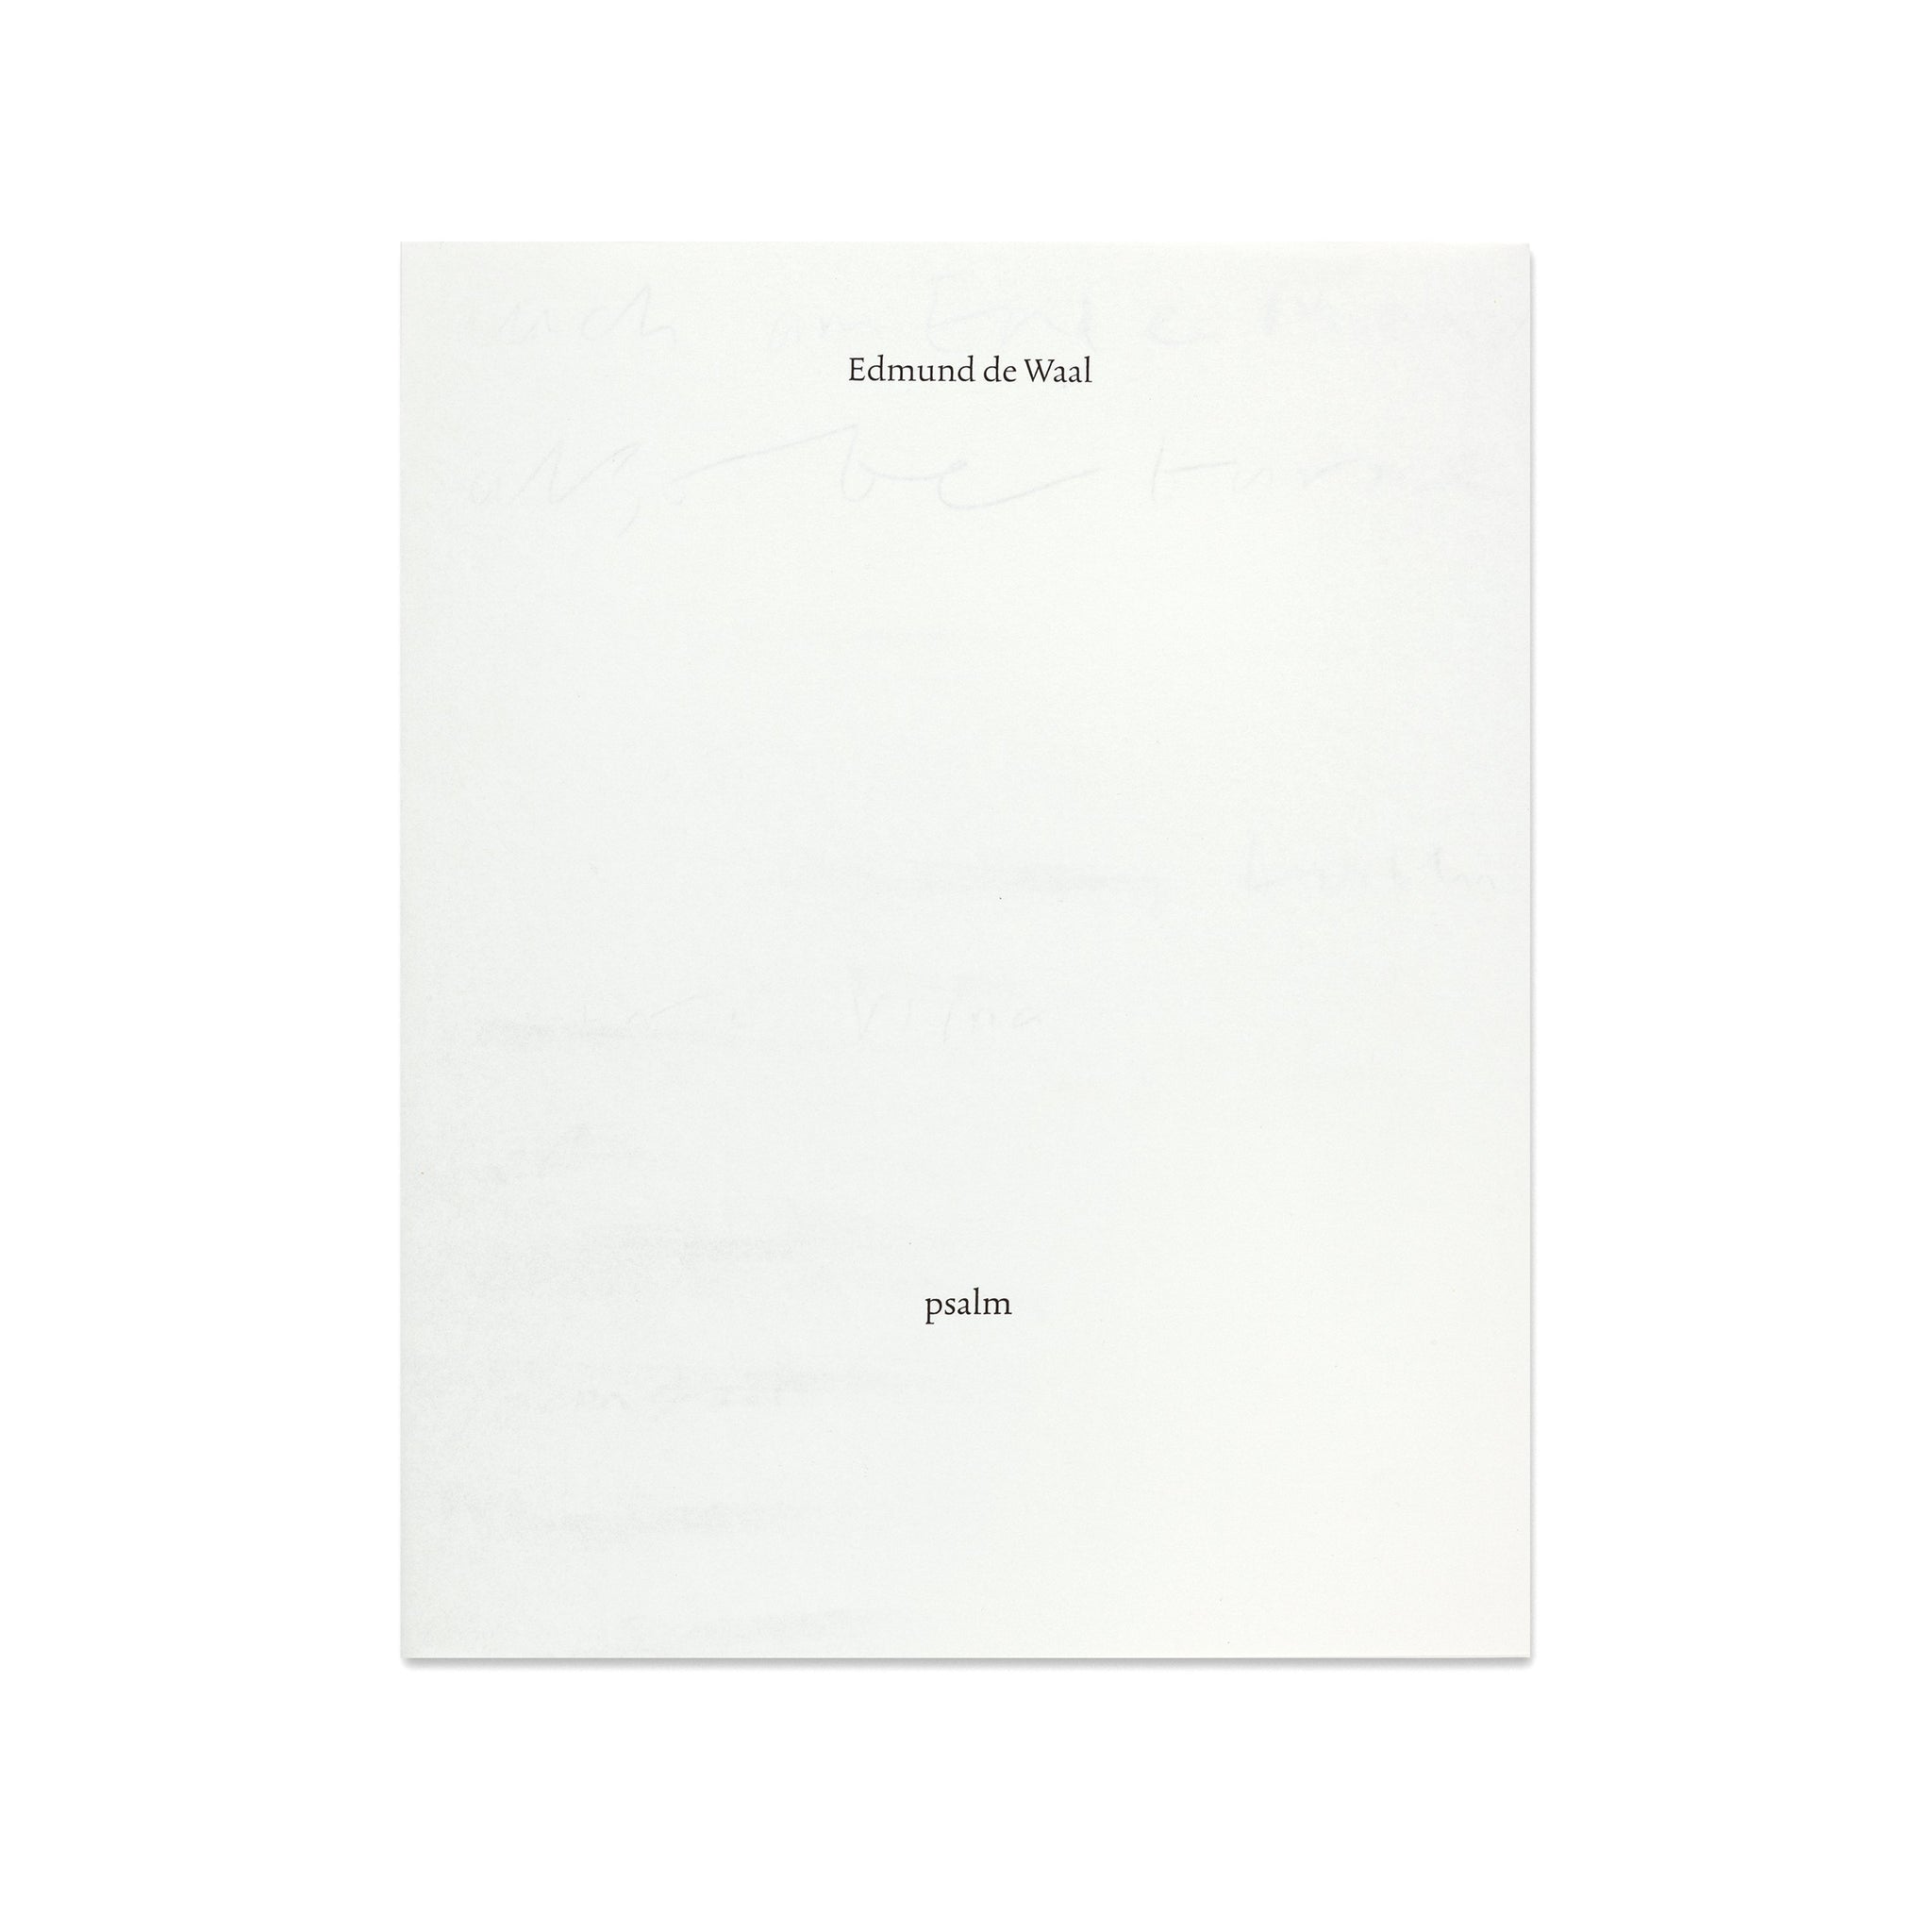 Cover of the book Edmund de Waal: psalm